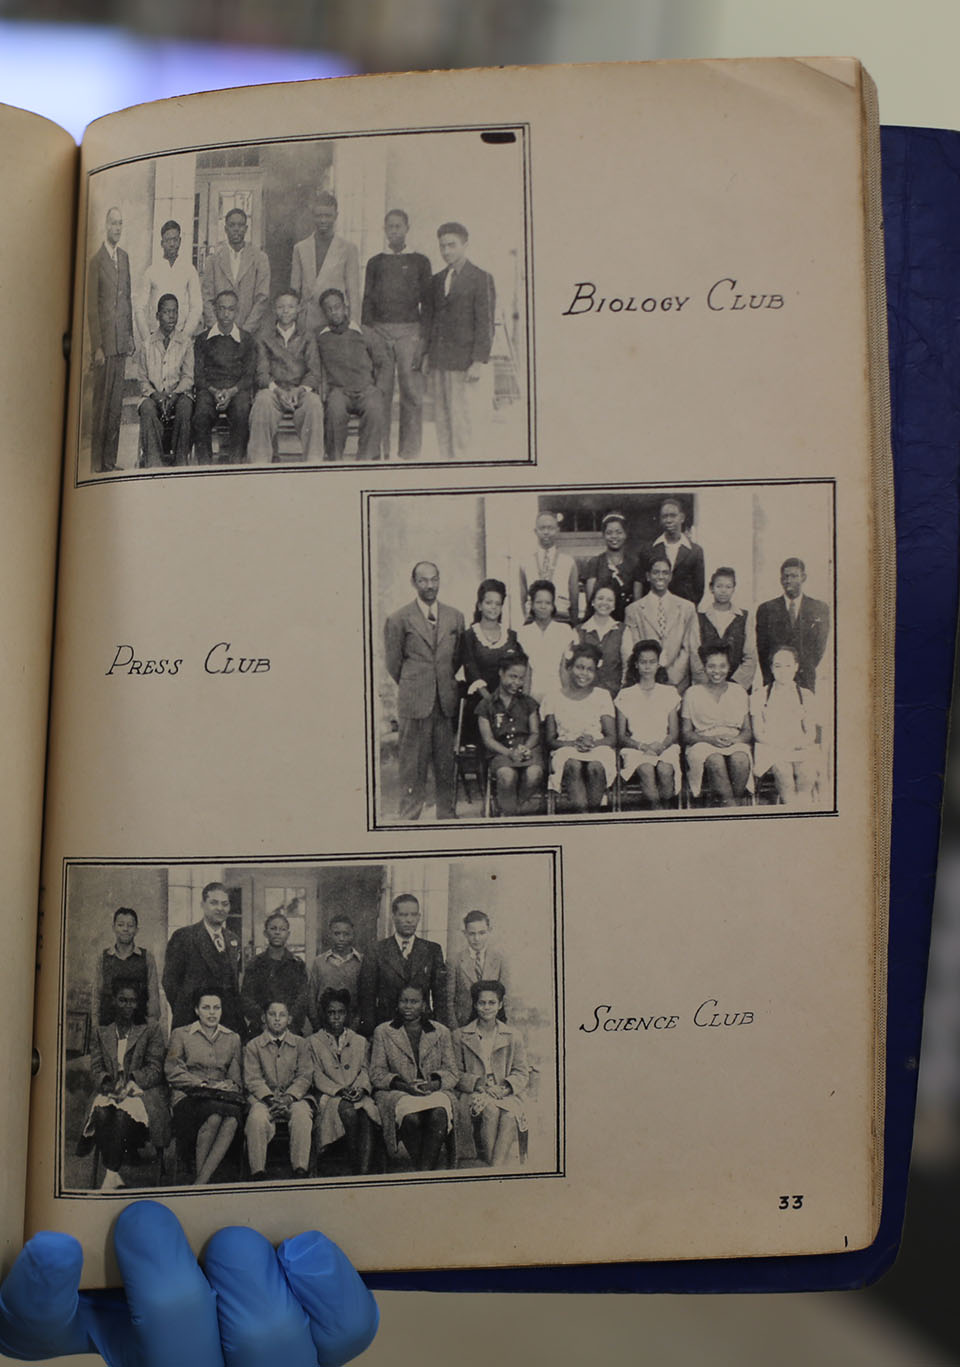 Academic Clubs of Central High School, 1945-46 Yearbook